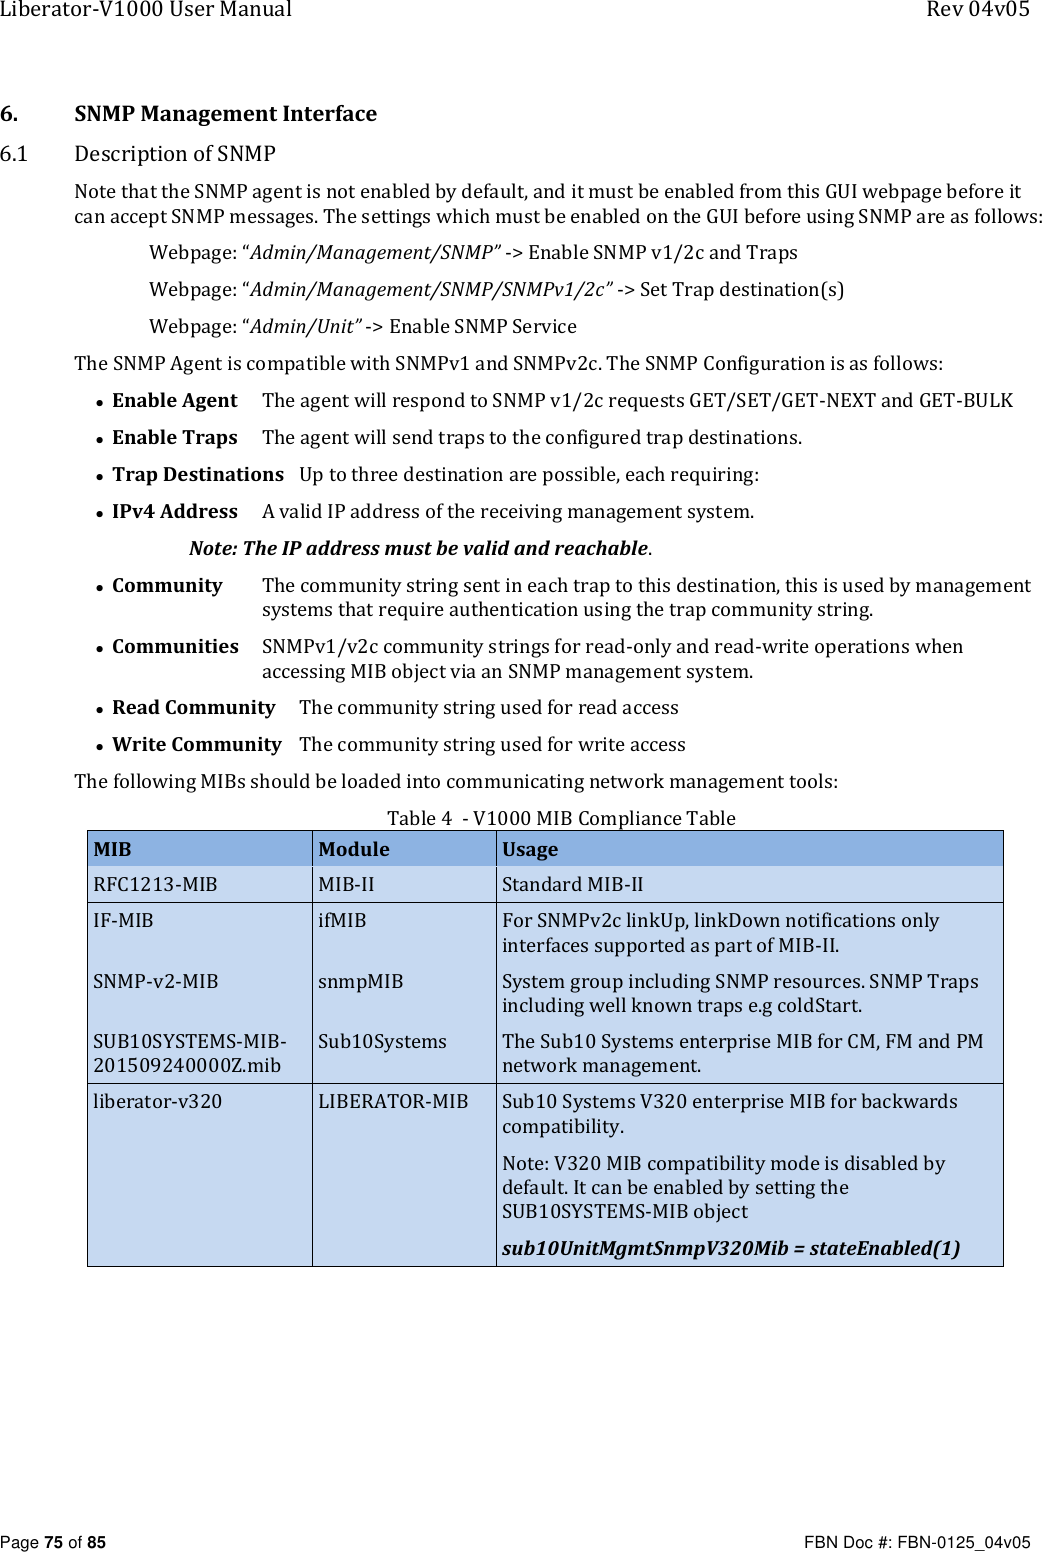 Liberator-V1000 User Manual  Rev 04v05     Page 75 of 85   FBN Doc #: FBN-0125_04v05 6. SNMP Management Interface 6.1 Description of SNMP Note that the SNMP agent is not enabled by default, and it must be enabled from this GUI webpage before it can accept SNMP messages. The settings which must be enabled on the GUI before using SNMP are as follows: Webpage: “Admin/Management/SNMP” -&gt; Enable SNMP v1/2c and Traps Webpage: “Admin/Management/SNMP/SNMPv1/2c” -&gt; Set Trap destination(s) Webpage: “Admin/Unit” -&gt; Enable SNMP Service The SNMP Agent is compatible with SNMPv1 and SNMPv2c. The SNMP Configuration is as follows: • Enable Agent   The agent will respond to SNMP v1/2c requests GET/SET/GET-NEXT and GET-BULK • Enable Traps   The agent will send traps to the configured trap destinations. • Trap Destinations   Up to three destination are possible, each requiring: • IPv4 Address   A valid IP address of the receiving management system.                           Note: The IP address must be valid and reachable. • Community   The community string sent in each trap to this destination, this is used by management systems that require authentication using the trap community string. • Communities   SNMPv1/v2c community strings for read-only and read-write operations when accessing MIB object via an SNMP management system. • Read Community   The community string used for read access • Write Community   The community string used for write access The following MIBs should be loaded into communicating network management tools: Table 4  - V1000 MIB Compliance Table MIB Module Usage RFC1213-MIB MIB-II Standard MIB-II IF-MIB ifMIB For SNMPv2c linkUp, linkDown notifications only interfaces supported as part of MIB-II.  SNMP-v2-MIB snmpMIB System group including SNMP resources. SNMP Traps including well known traps e.g coldStart. SUB10SYSTEMS-MIB-201509240000Z.mib Sub10Systems The Sub10 Systems enterprise MIB for CM, FM and PM network management. liberator-v320 LIBERATOR-MIB Sub10 Systems V320 enterprise MIB for backwards compatibility. Note: V320 MIB compatibility mode is disabled by default. It can be enabled by setting the SUB10SYSTEMS-MIB object sub10UnitMgmtSnmpV320Mib = stateEnabled(1)     